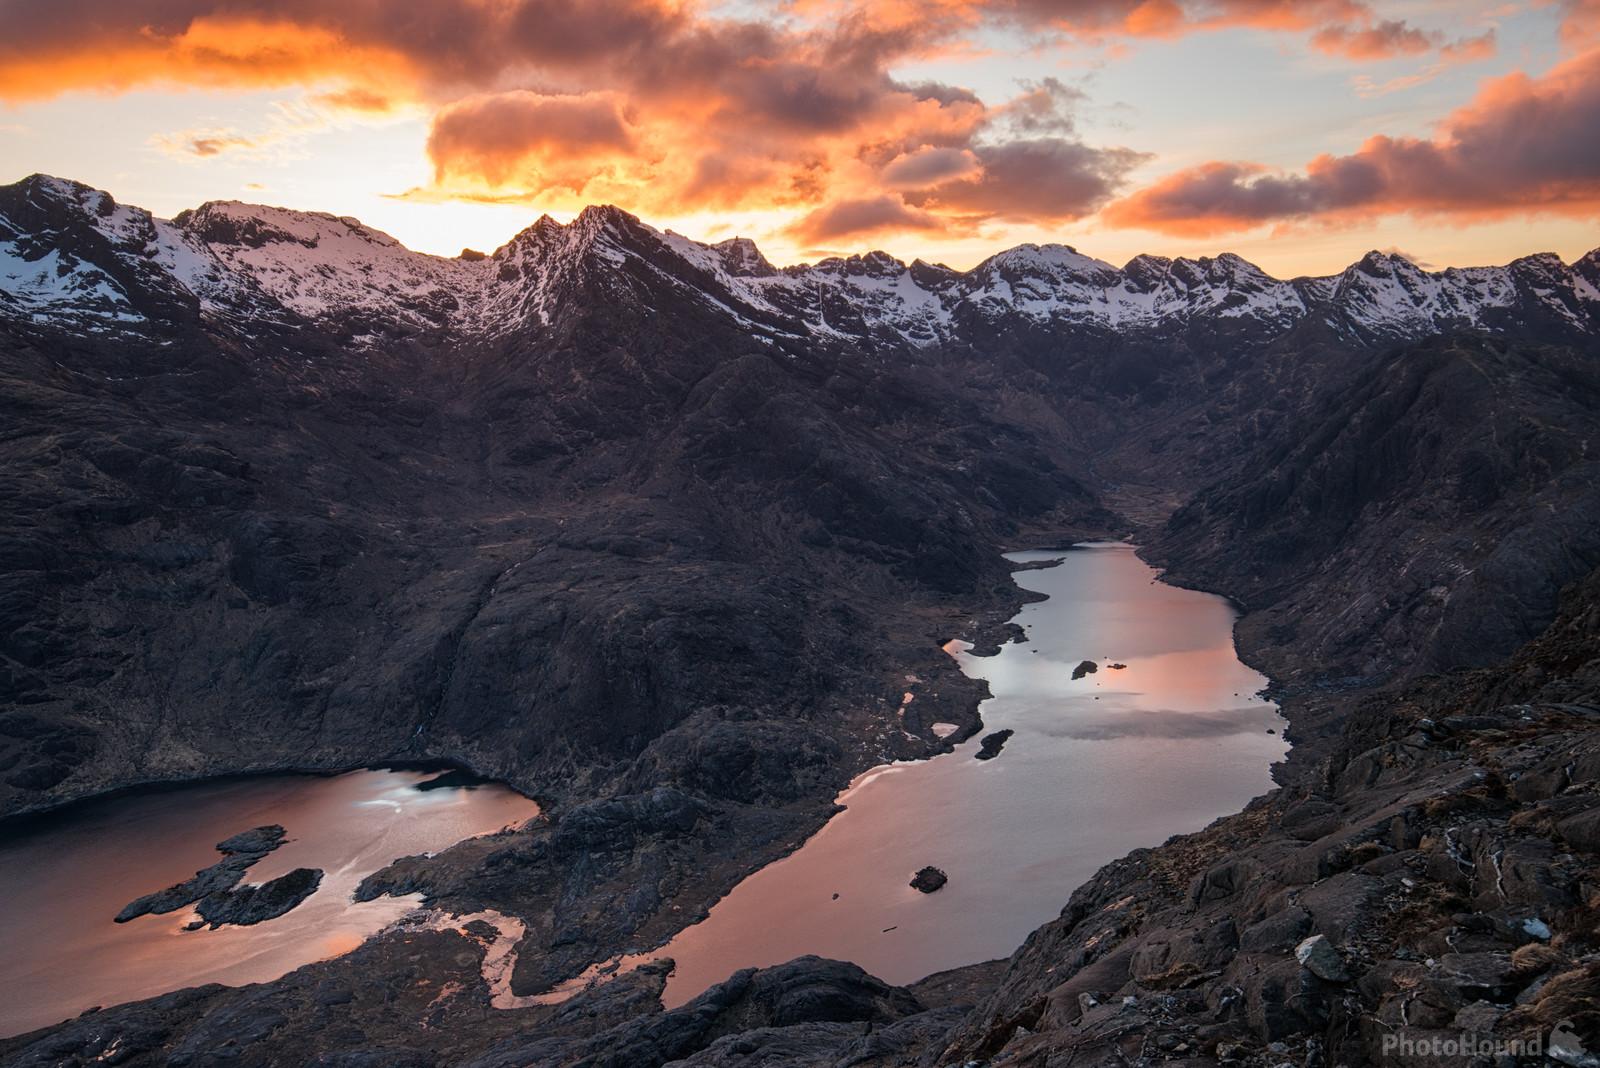 Image of Sgurr na Stri by Richard Lizzimore